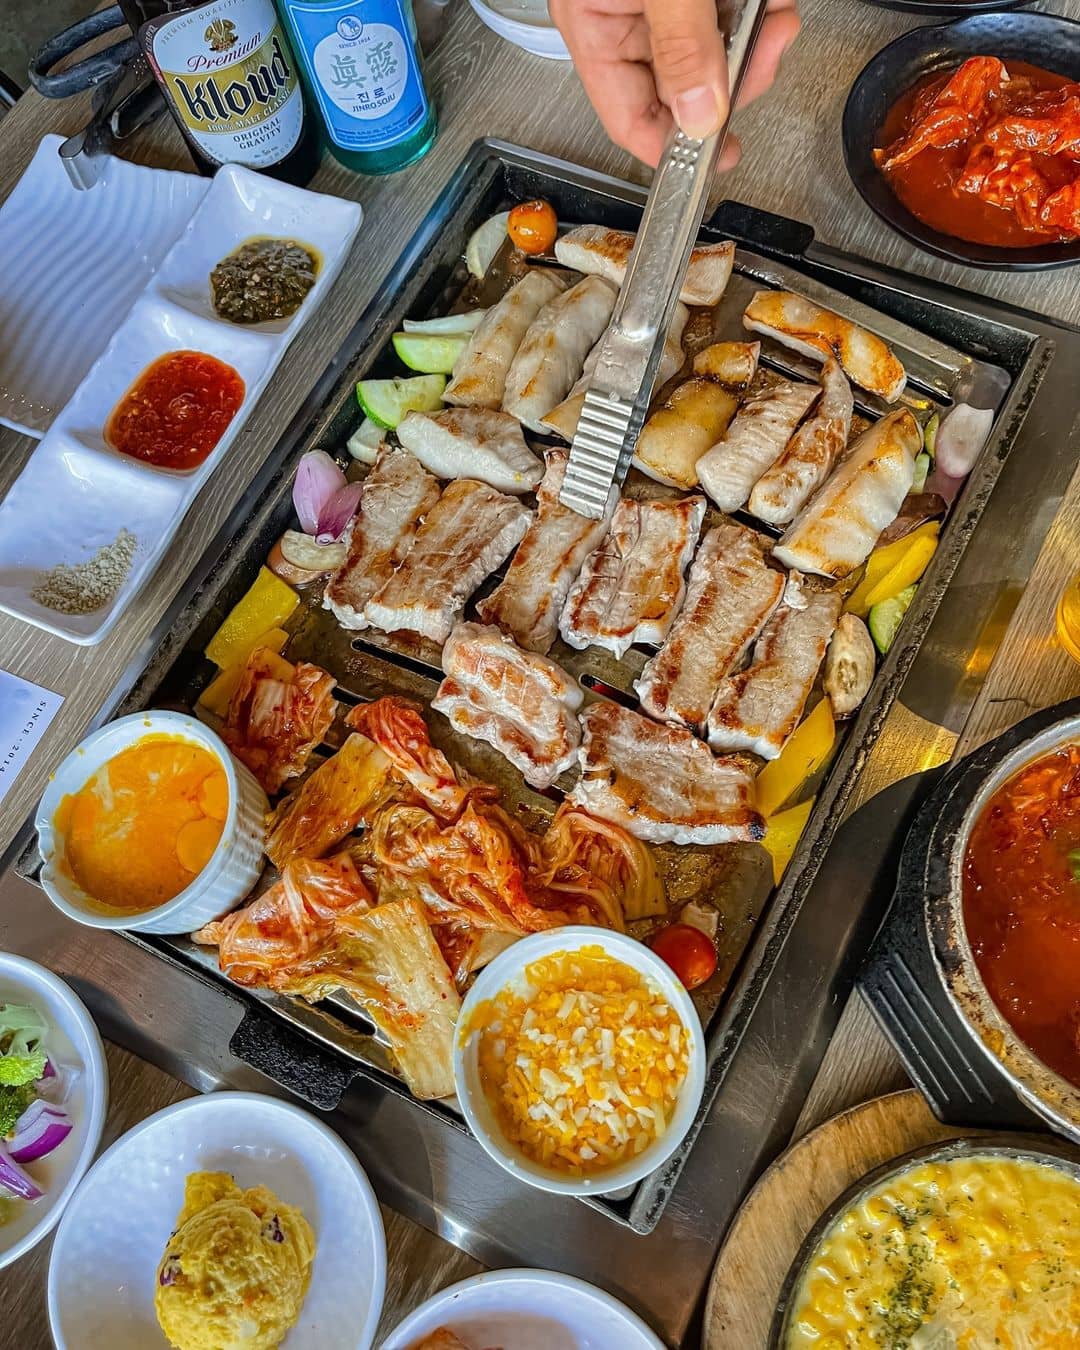 17 Exceptional Korean Restaurants to Try in Los Angeles